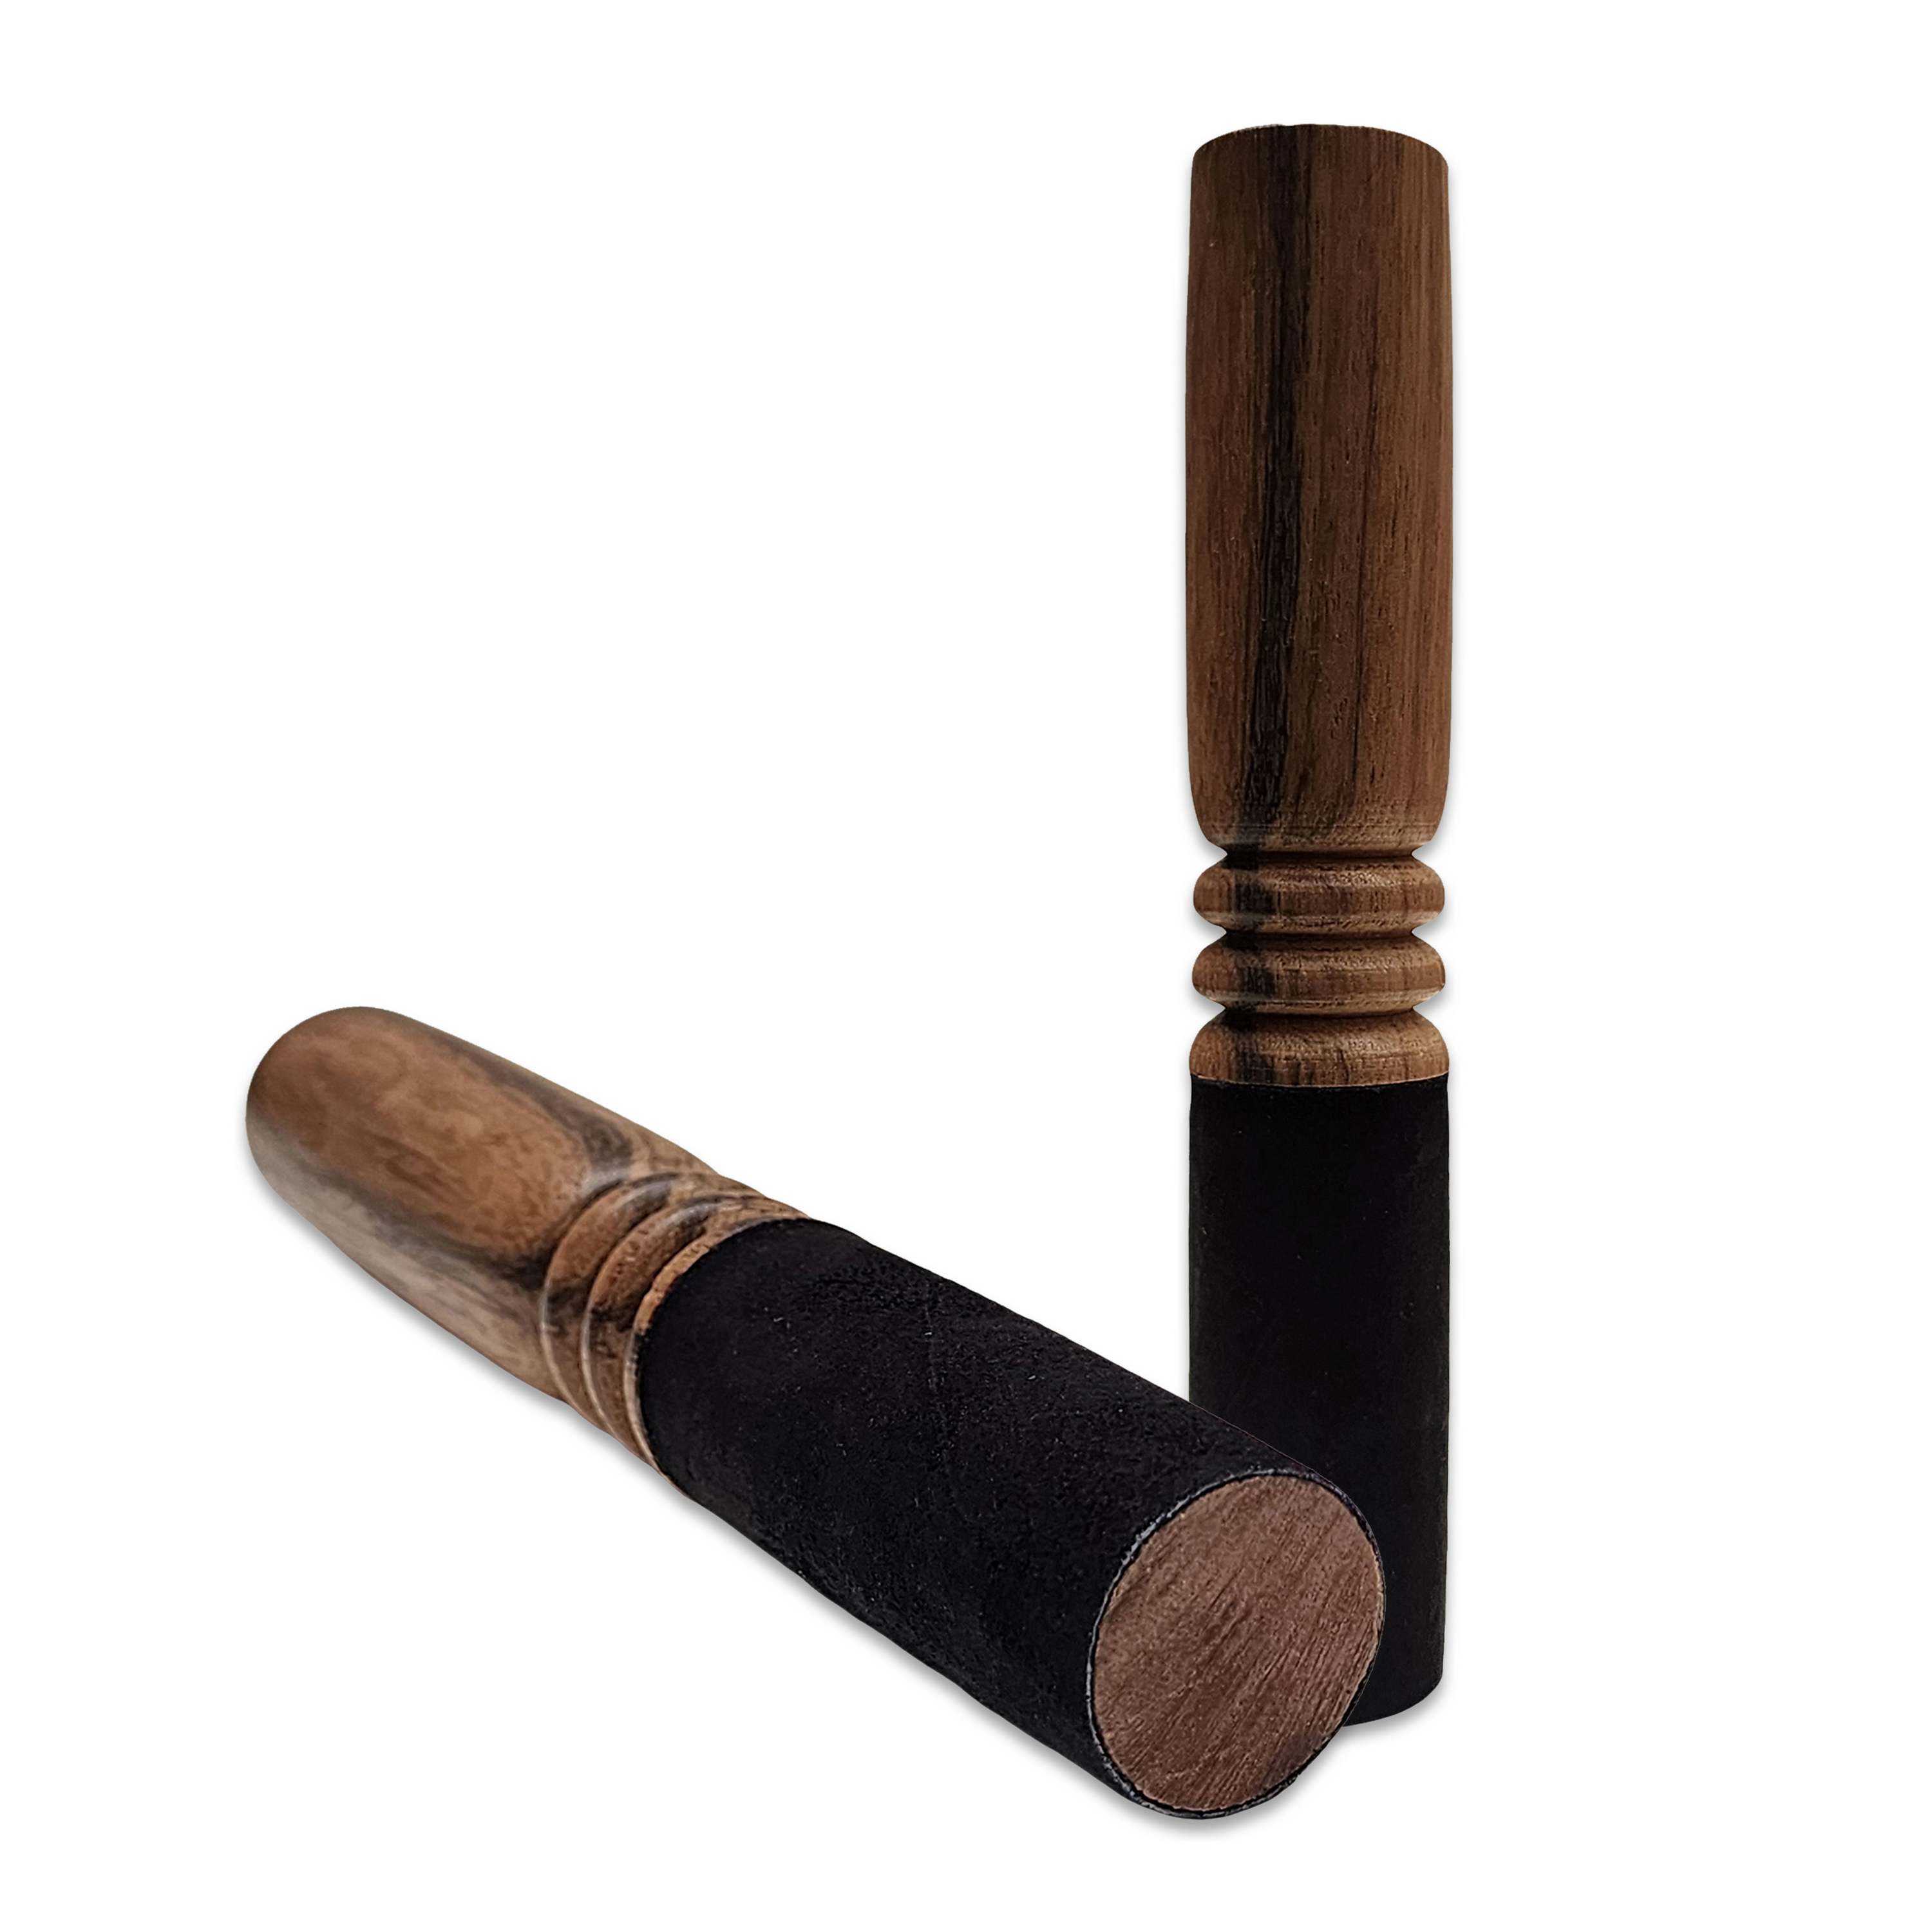 Singing Bowl Accessories, Wooden And Leather, Stroking And Playing Mallet, Medium Small